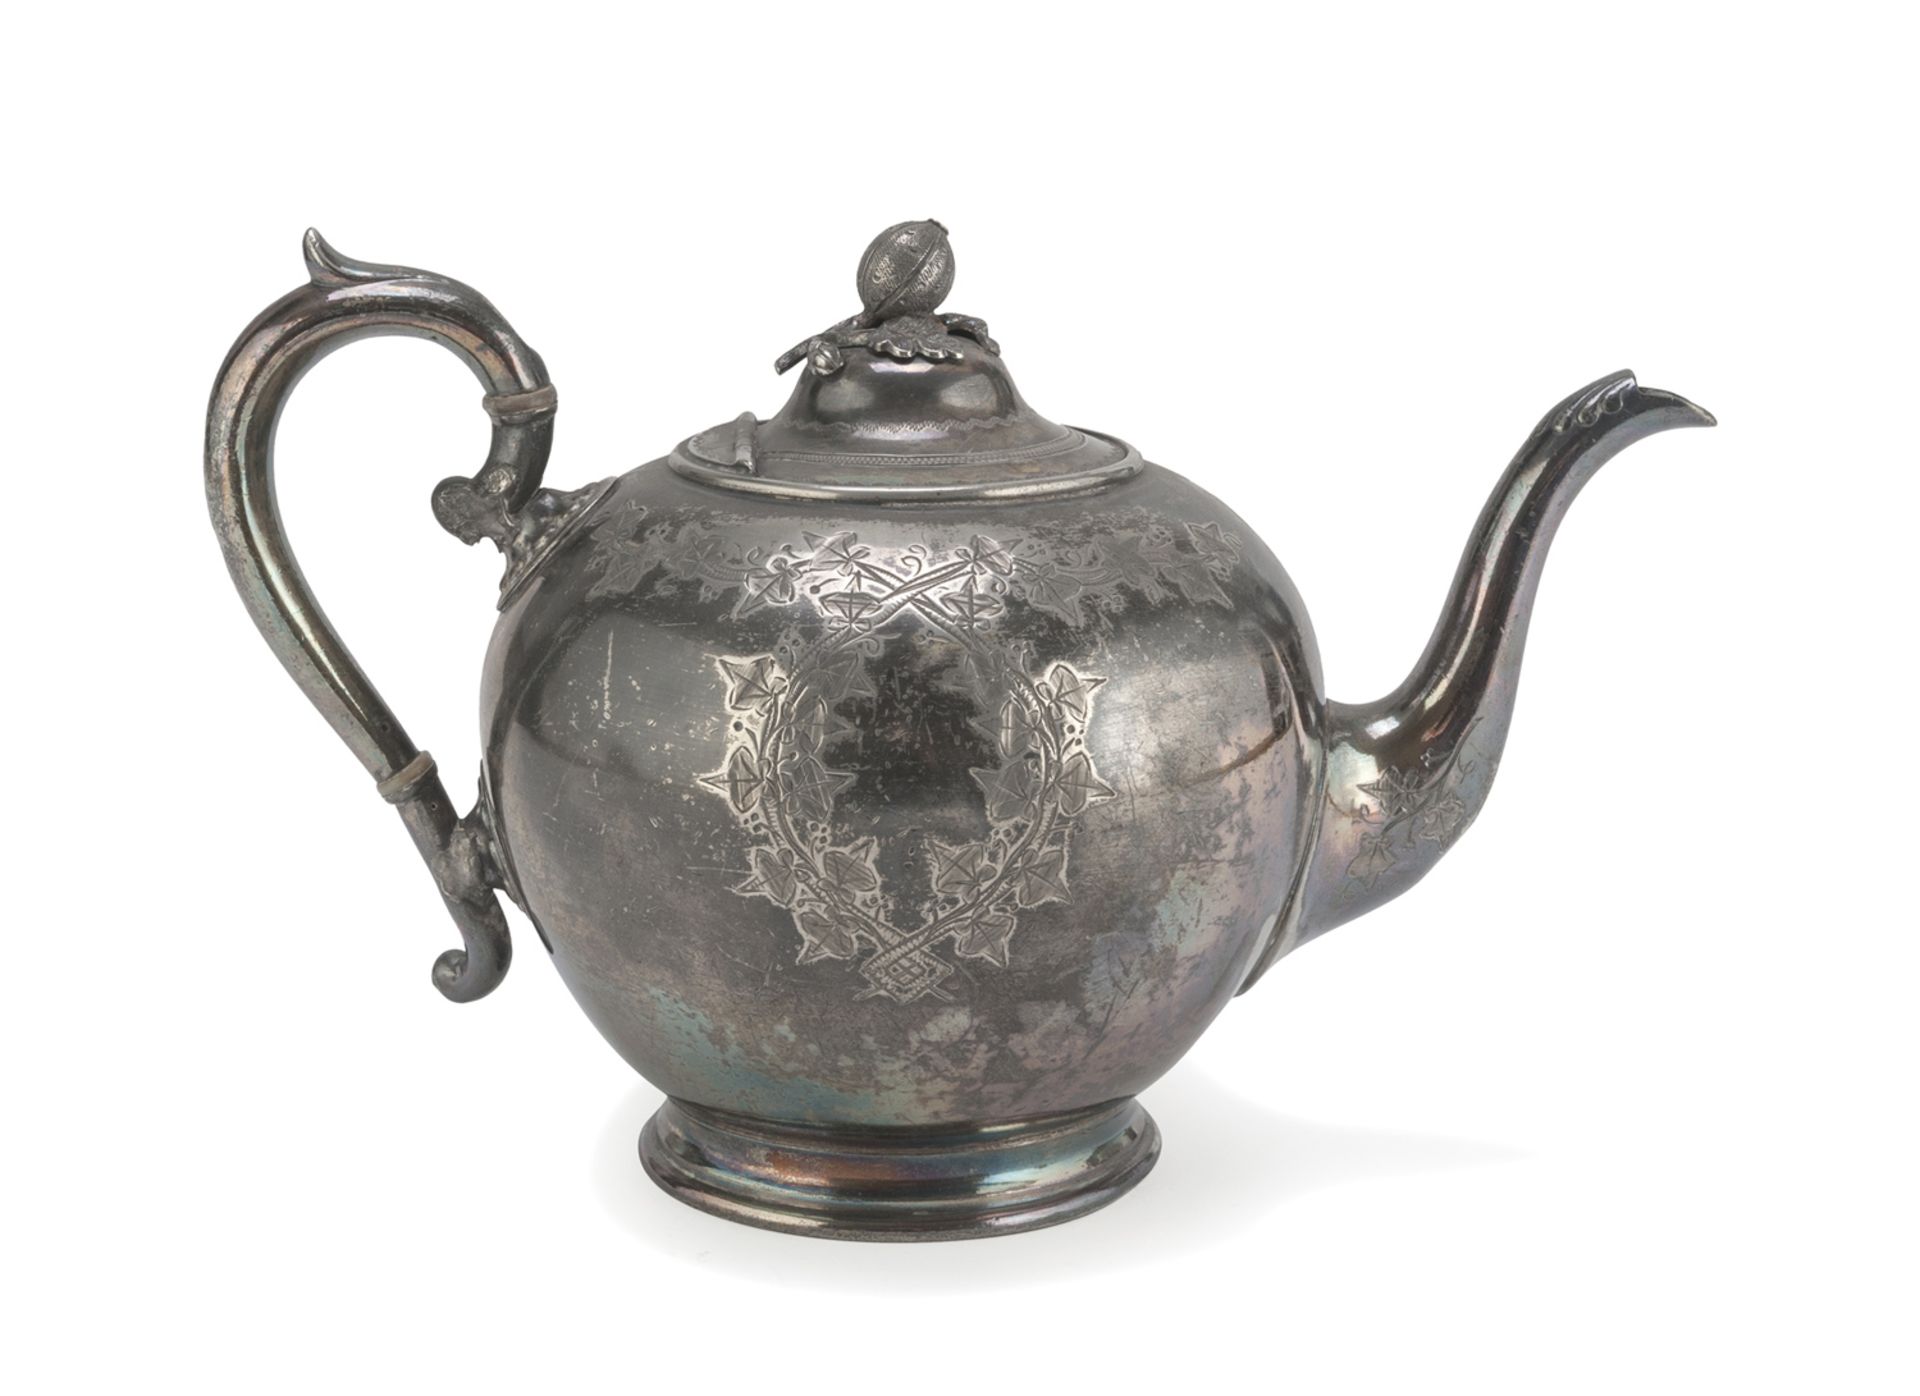 SILVERPLATED TEAPOT SHEFFIELD PUNCH 19TH CENTURY